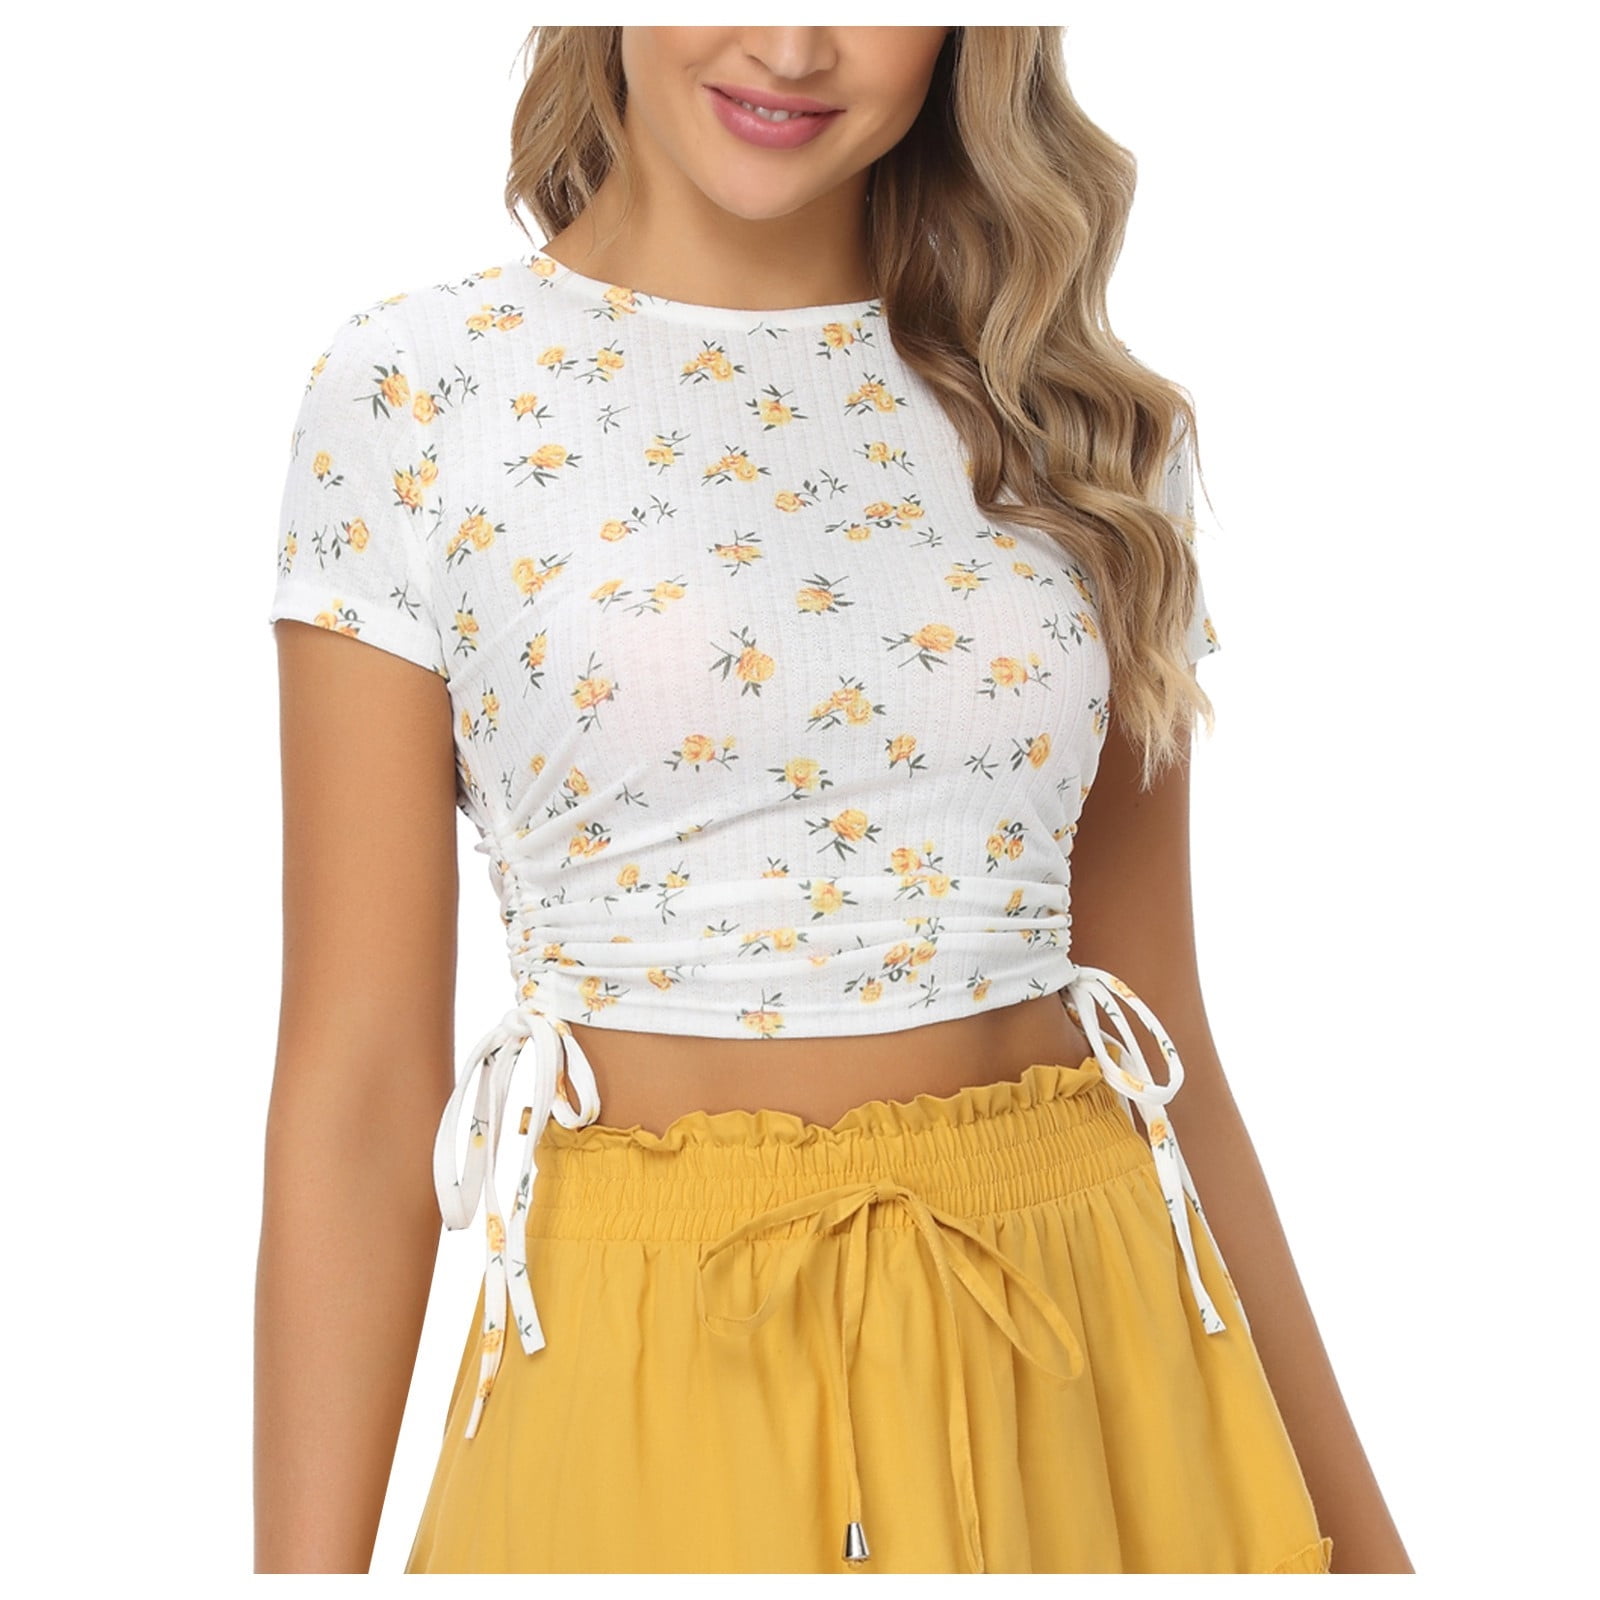 Lovskoo Summer Tops Crop Tops for Women Trendy Cute Shirt Large Short  Sleeve Shirts Striped Pocket Loose Casual Shirt Button Top Yellow